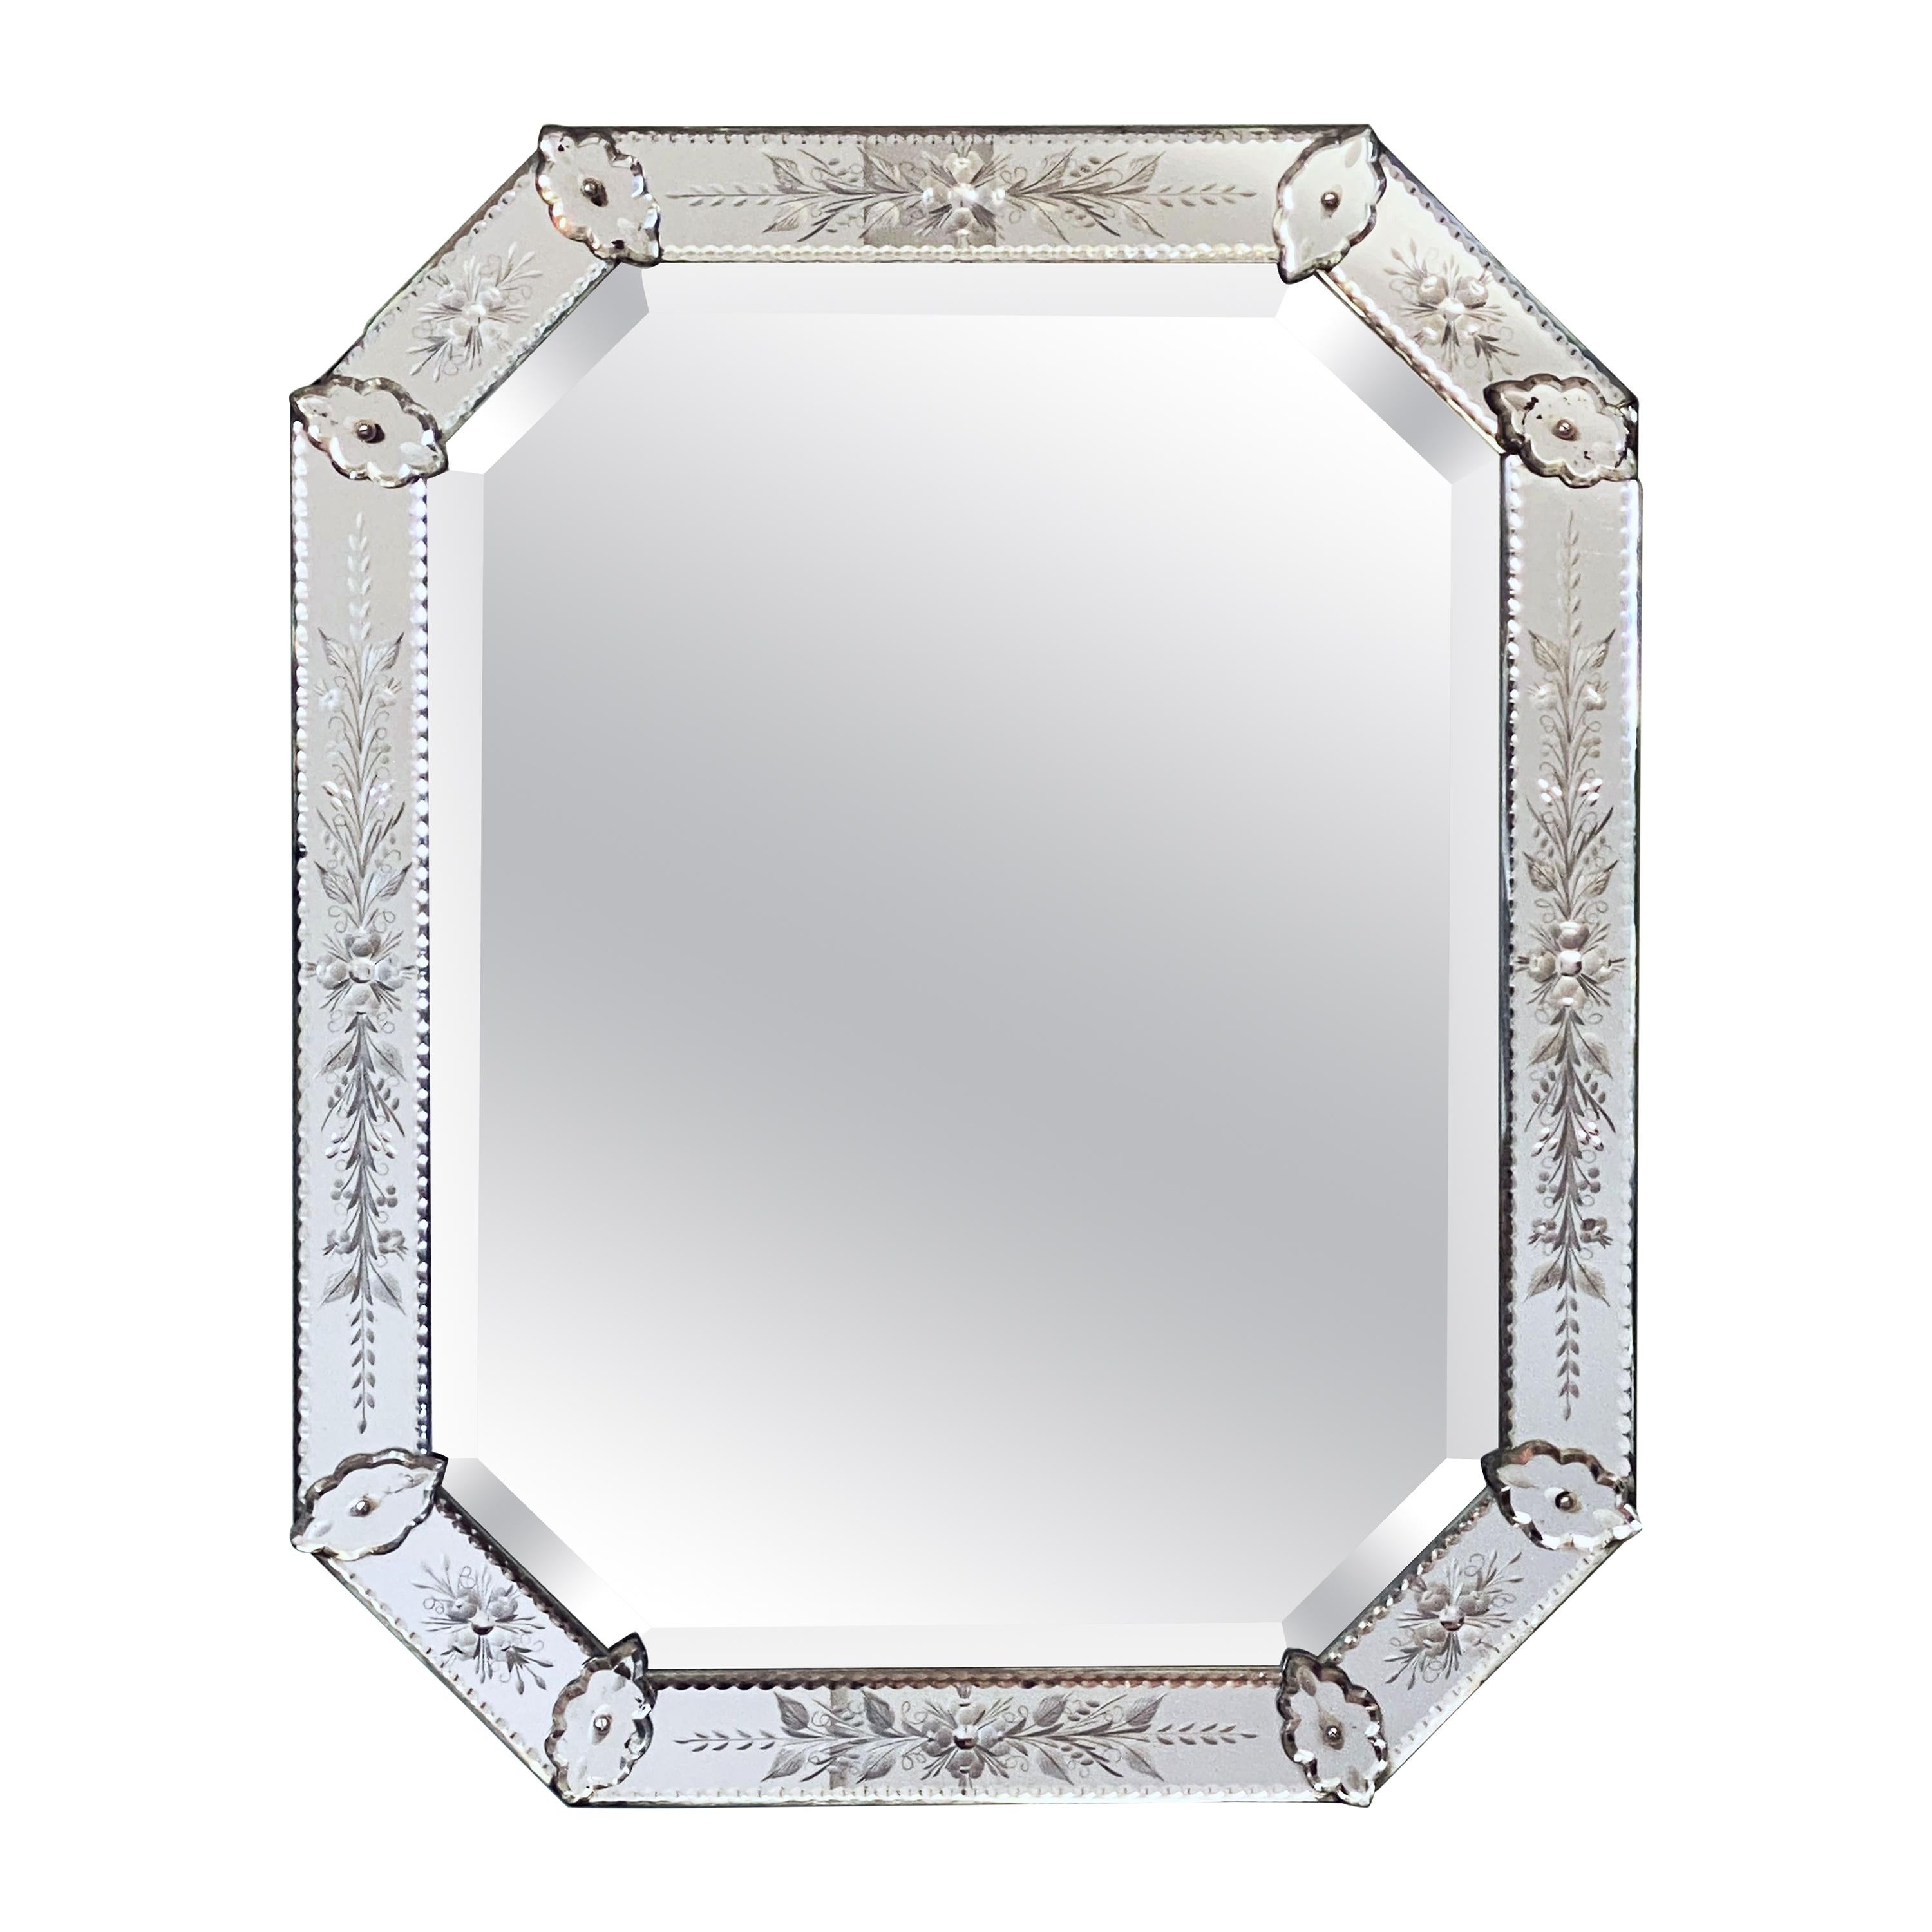 Venetian Octagonal Etched Beveled Wall Mirror from Italy